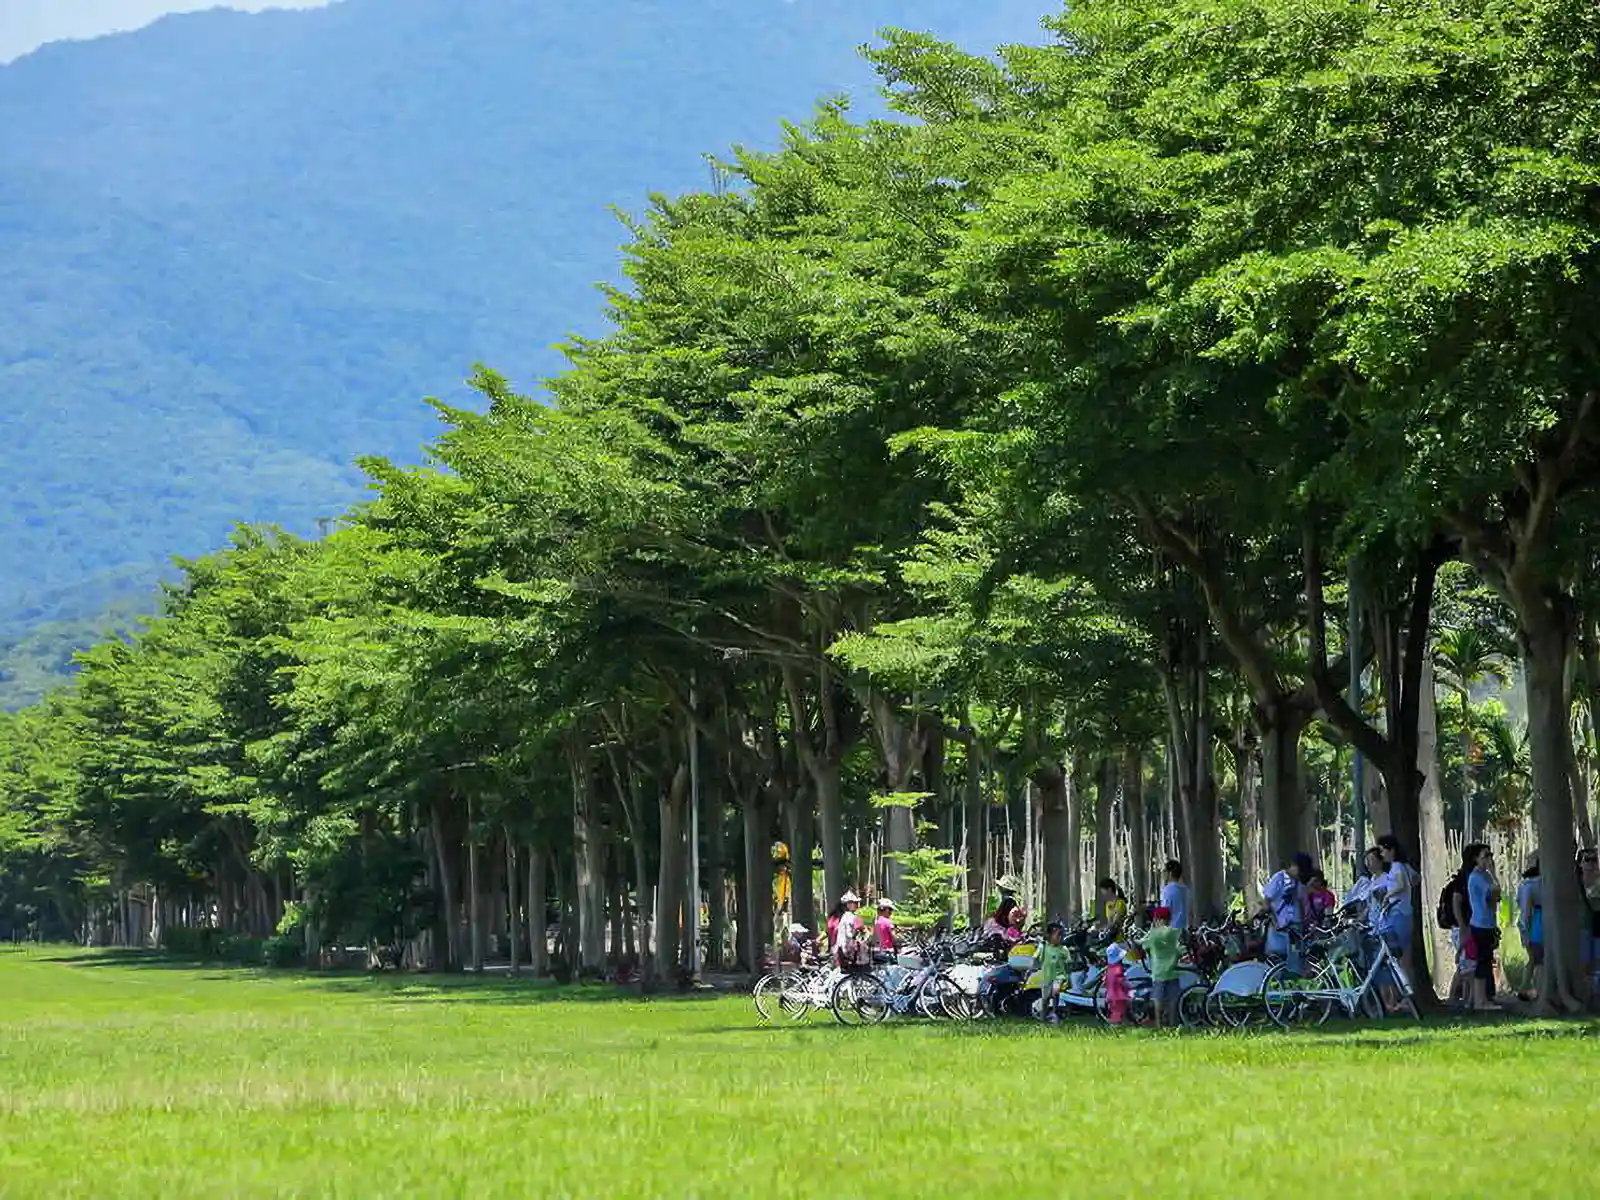 Bikes are parked by a group of trees on the side of a green field.